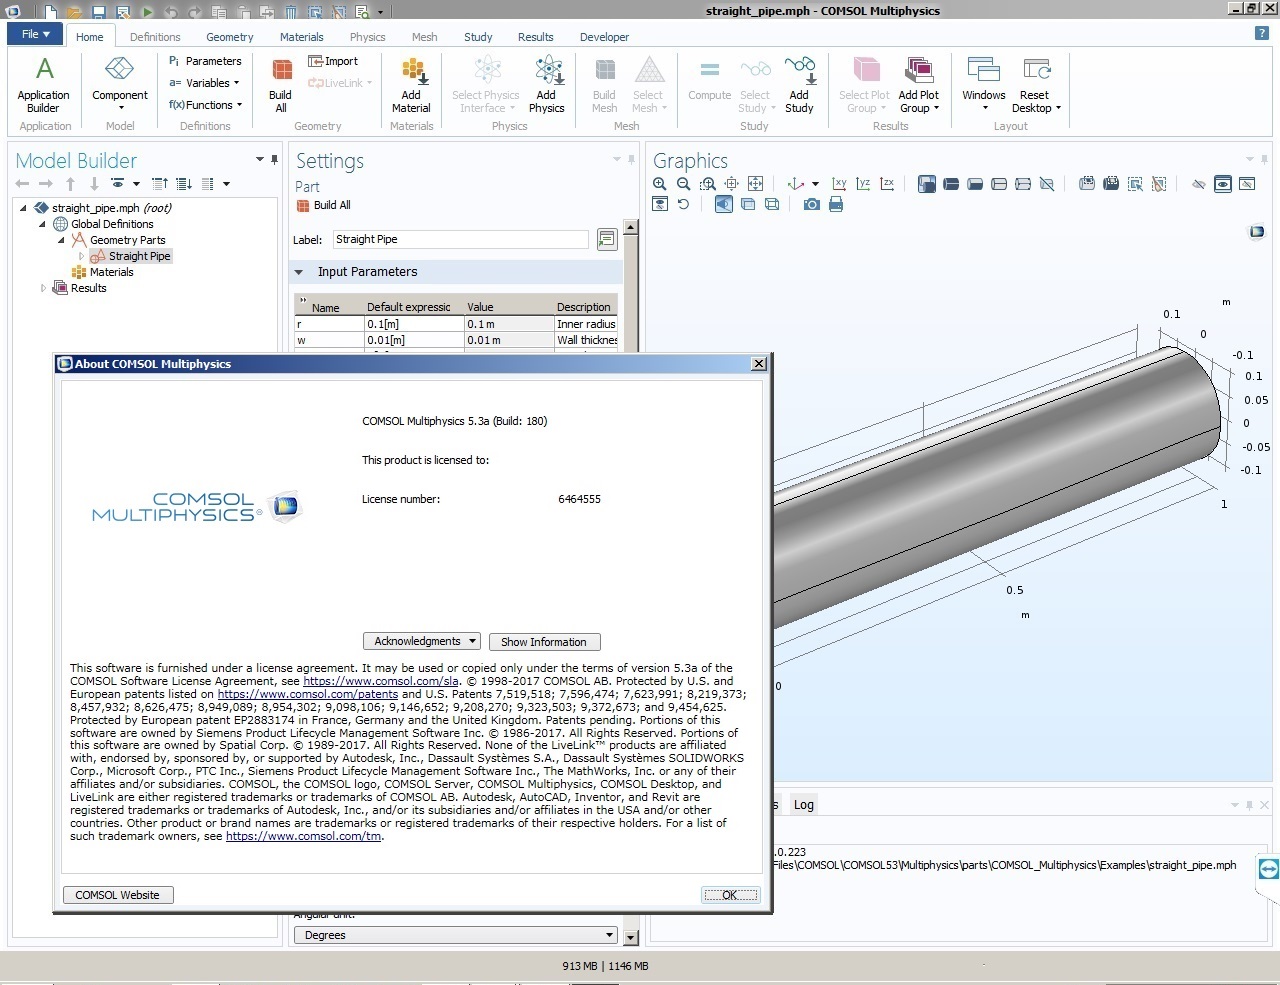 Working with Comsol Multiphysics 5.3a full license